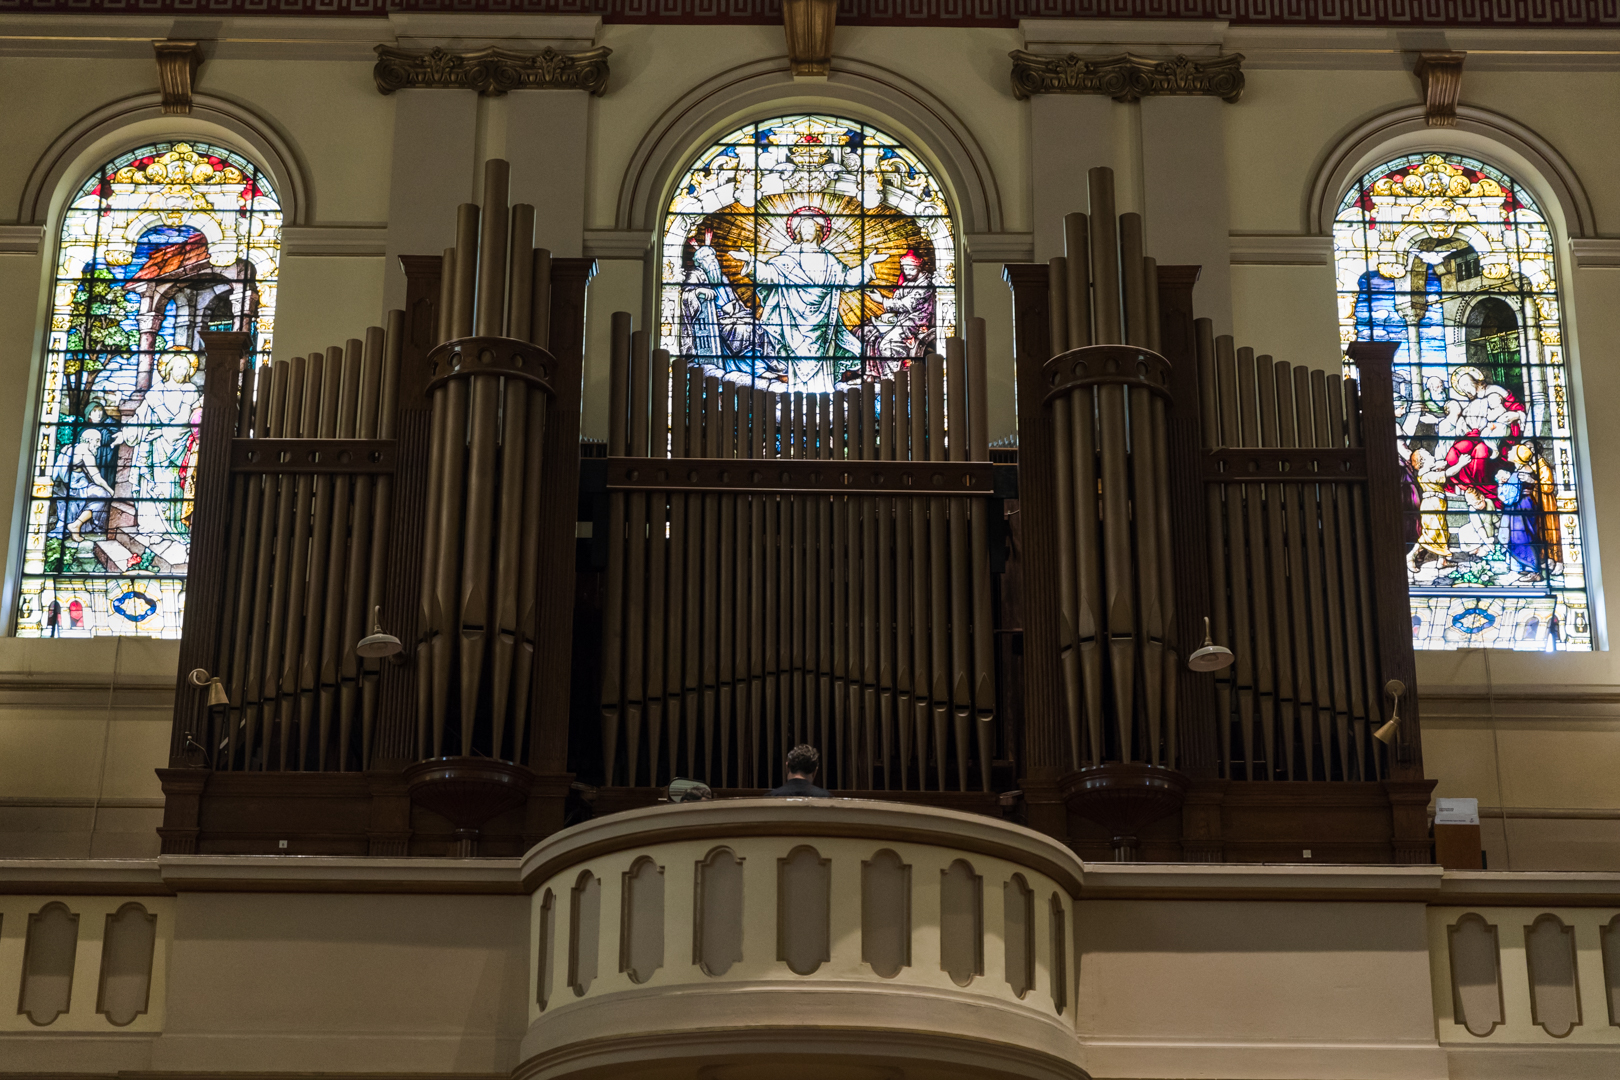 The William E. Baker & Co. organ was rebuilt in 1976. Eagle photo by Paul Frangipane